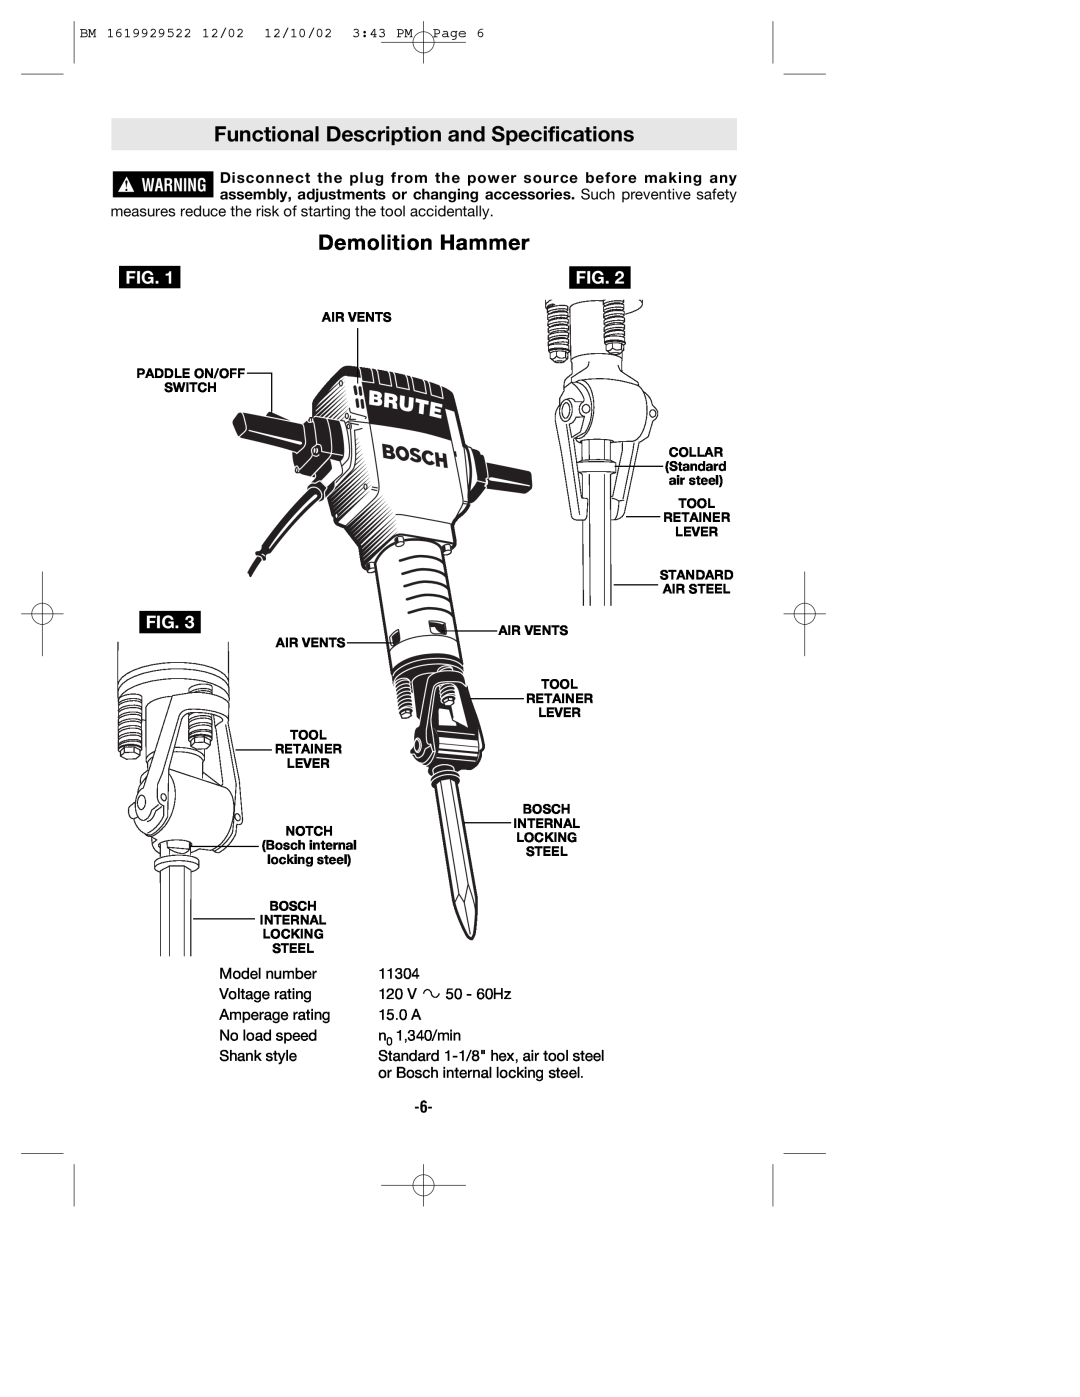 Bosch Power Tools 11304KD manual Functional Description and Specifications, Demolition Hammer 